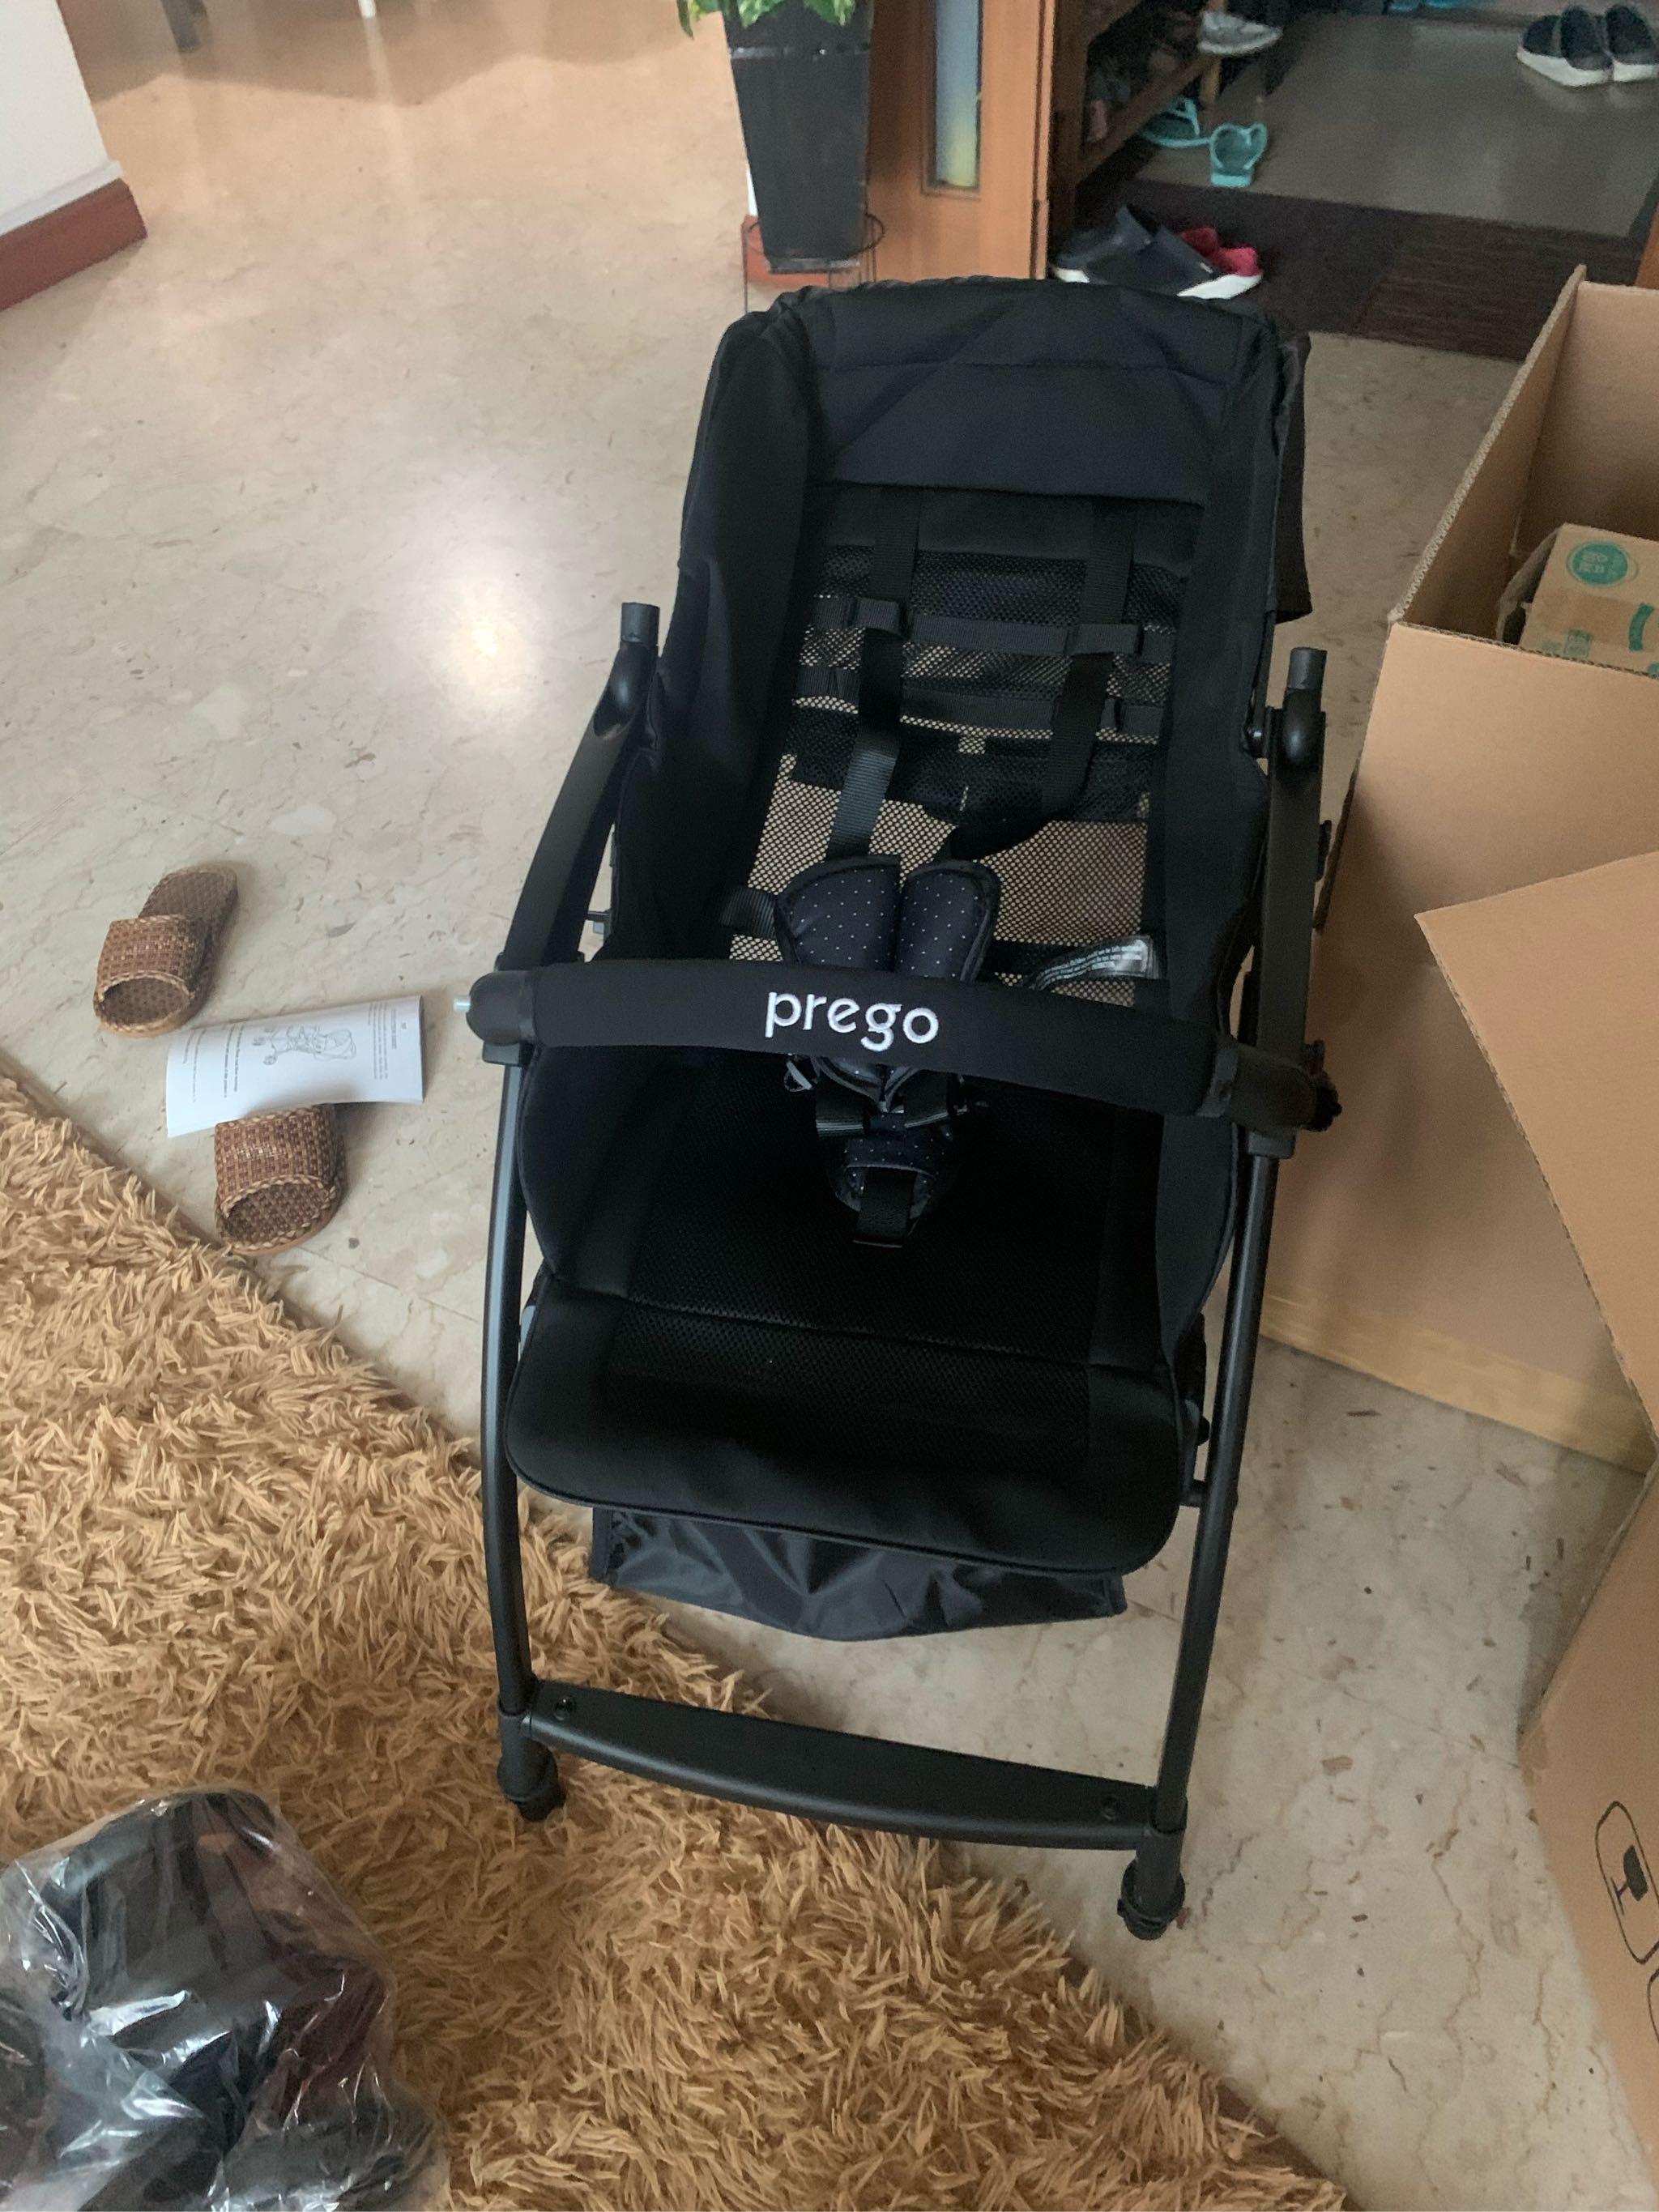 prego s507 review